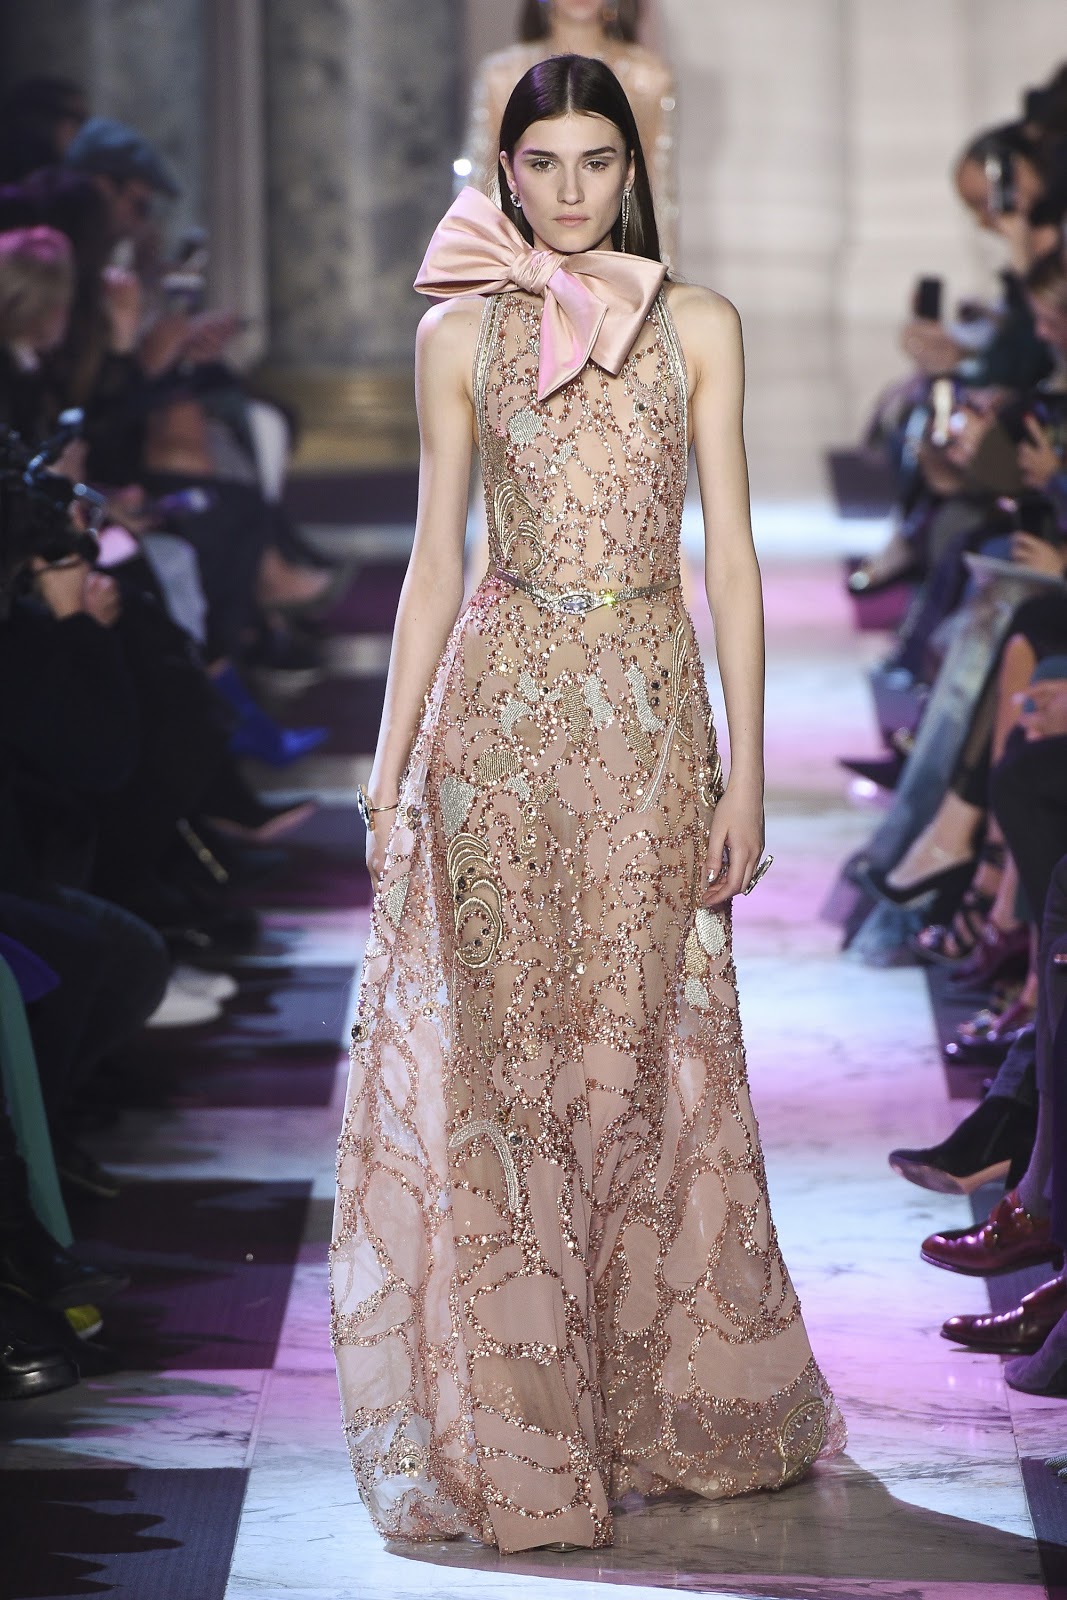 Elie Saab Spring/Summer 2018 Couture Show PFW | Cool Chic Style Fashion